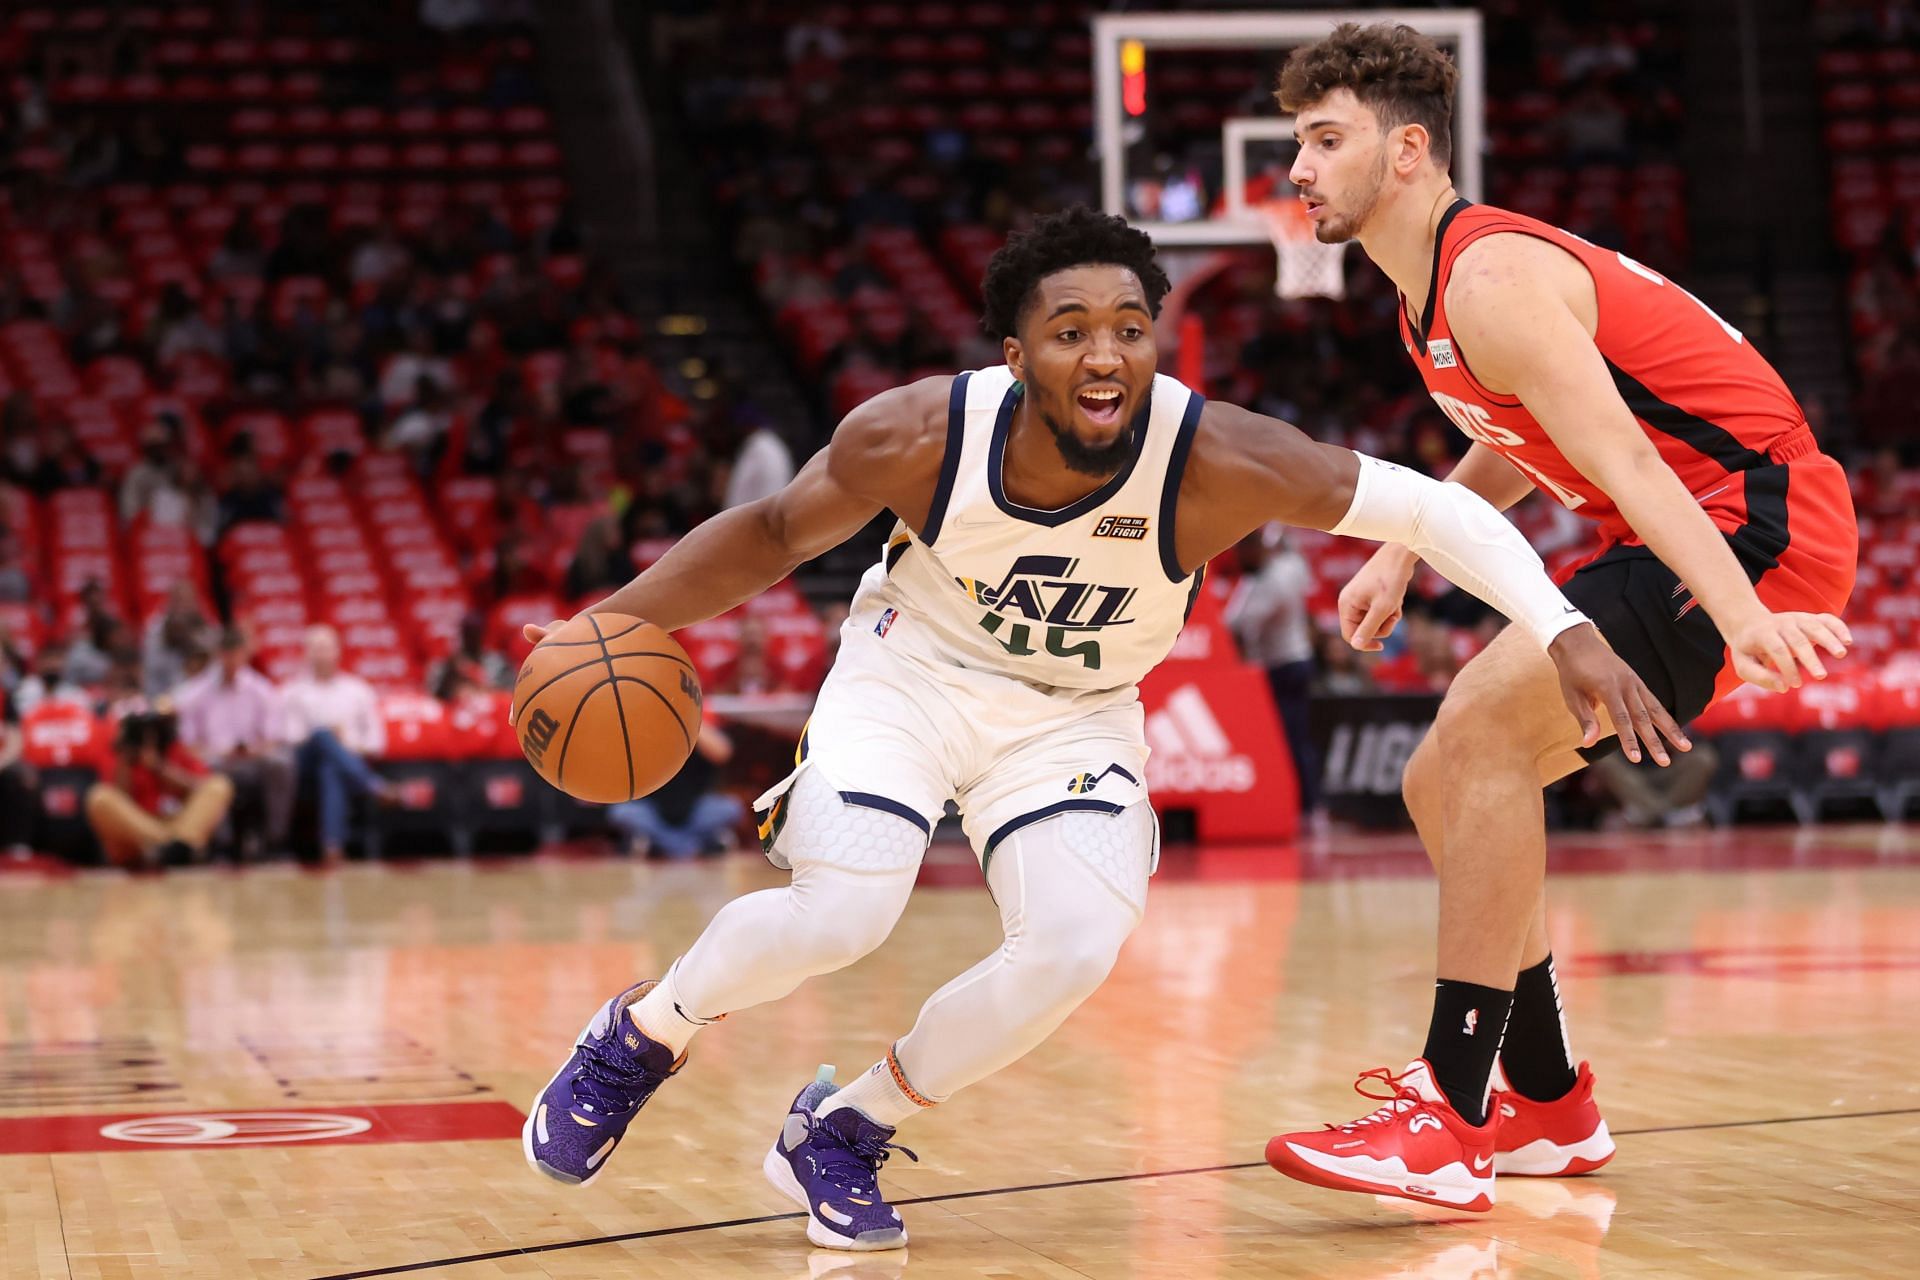 Donovan Mitchell #45 of the Utah Jazz controls the ball ahead of Alperen Sengun #28 of the Houston Rockets during the first half at Toyota Center on October 28, 2021 in Houston, Texas.